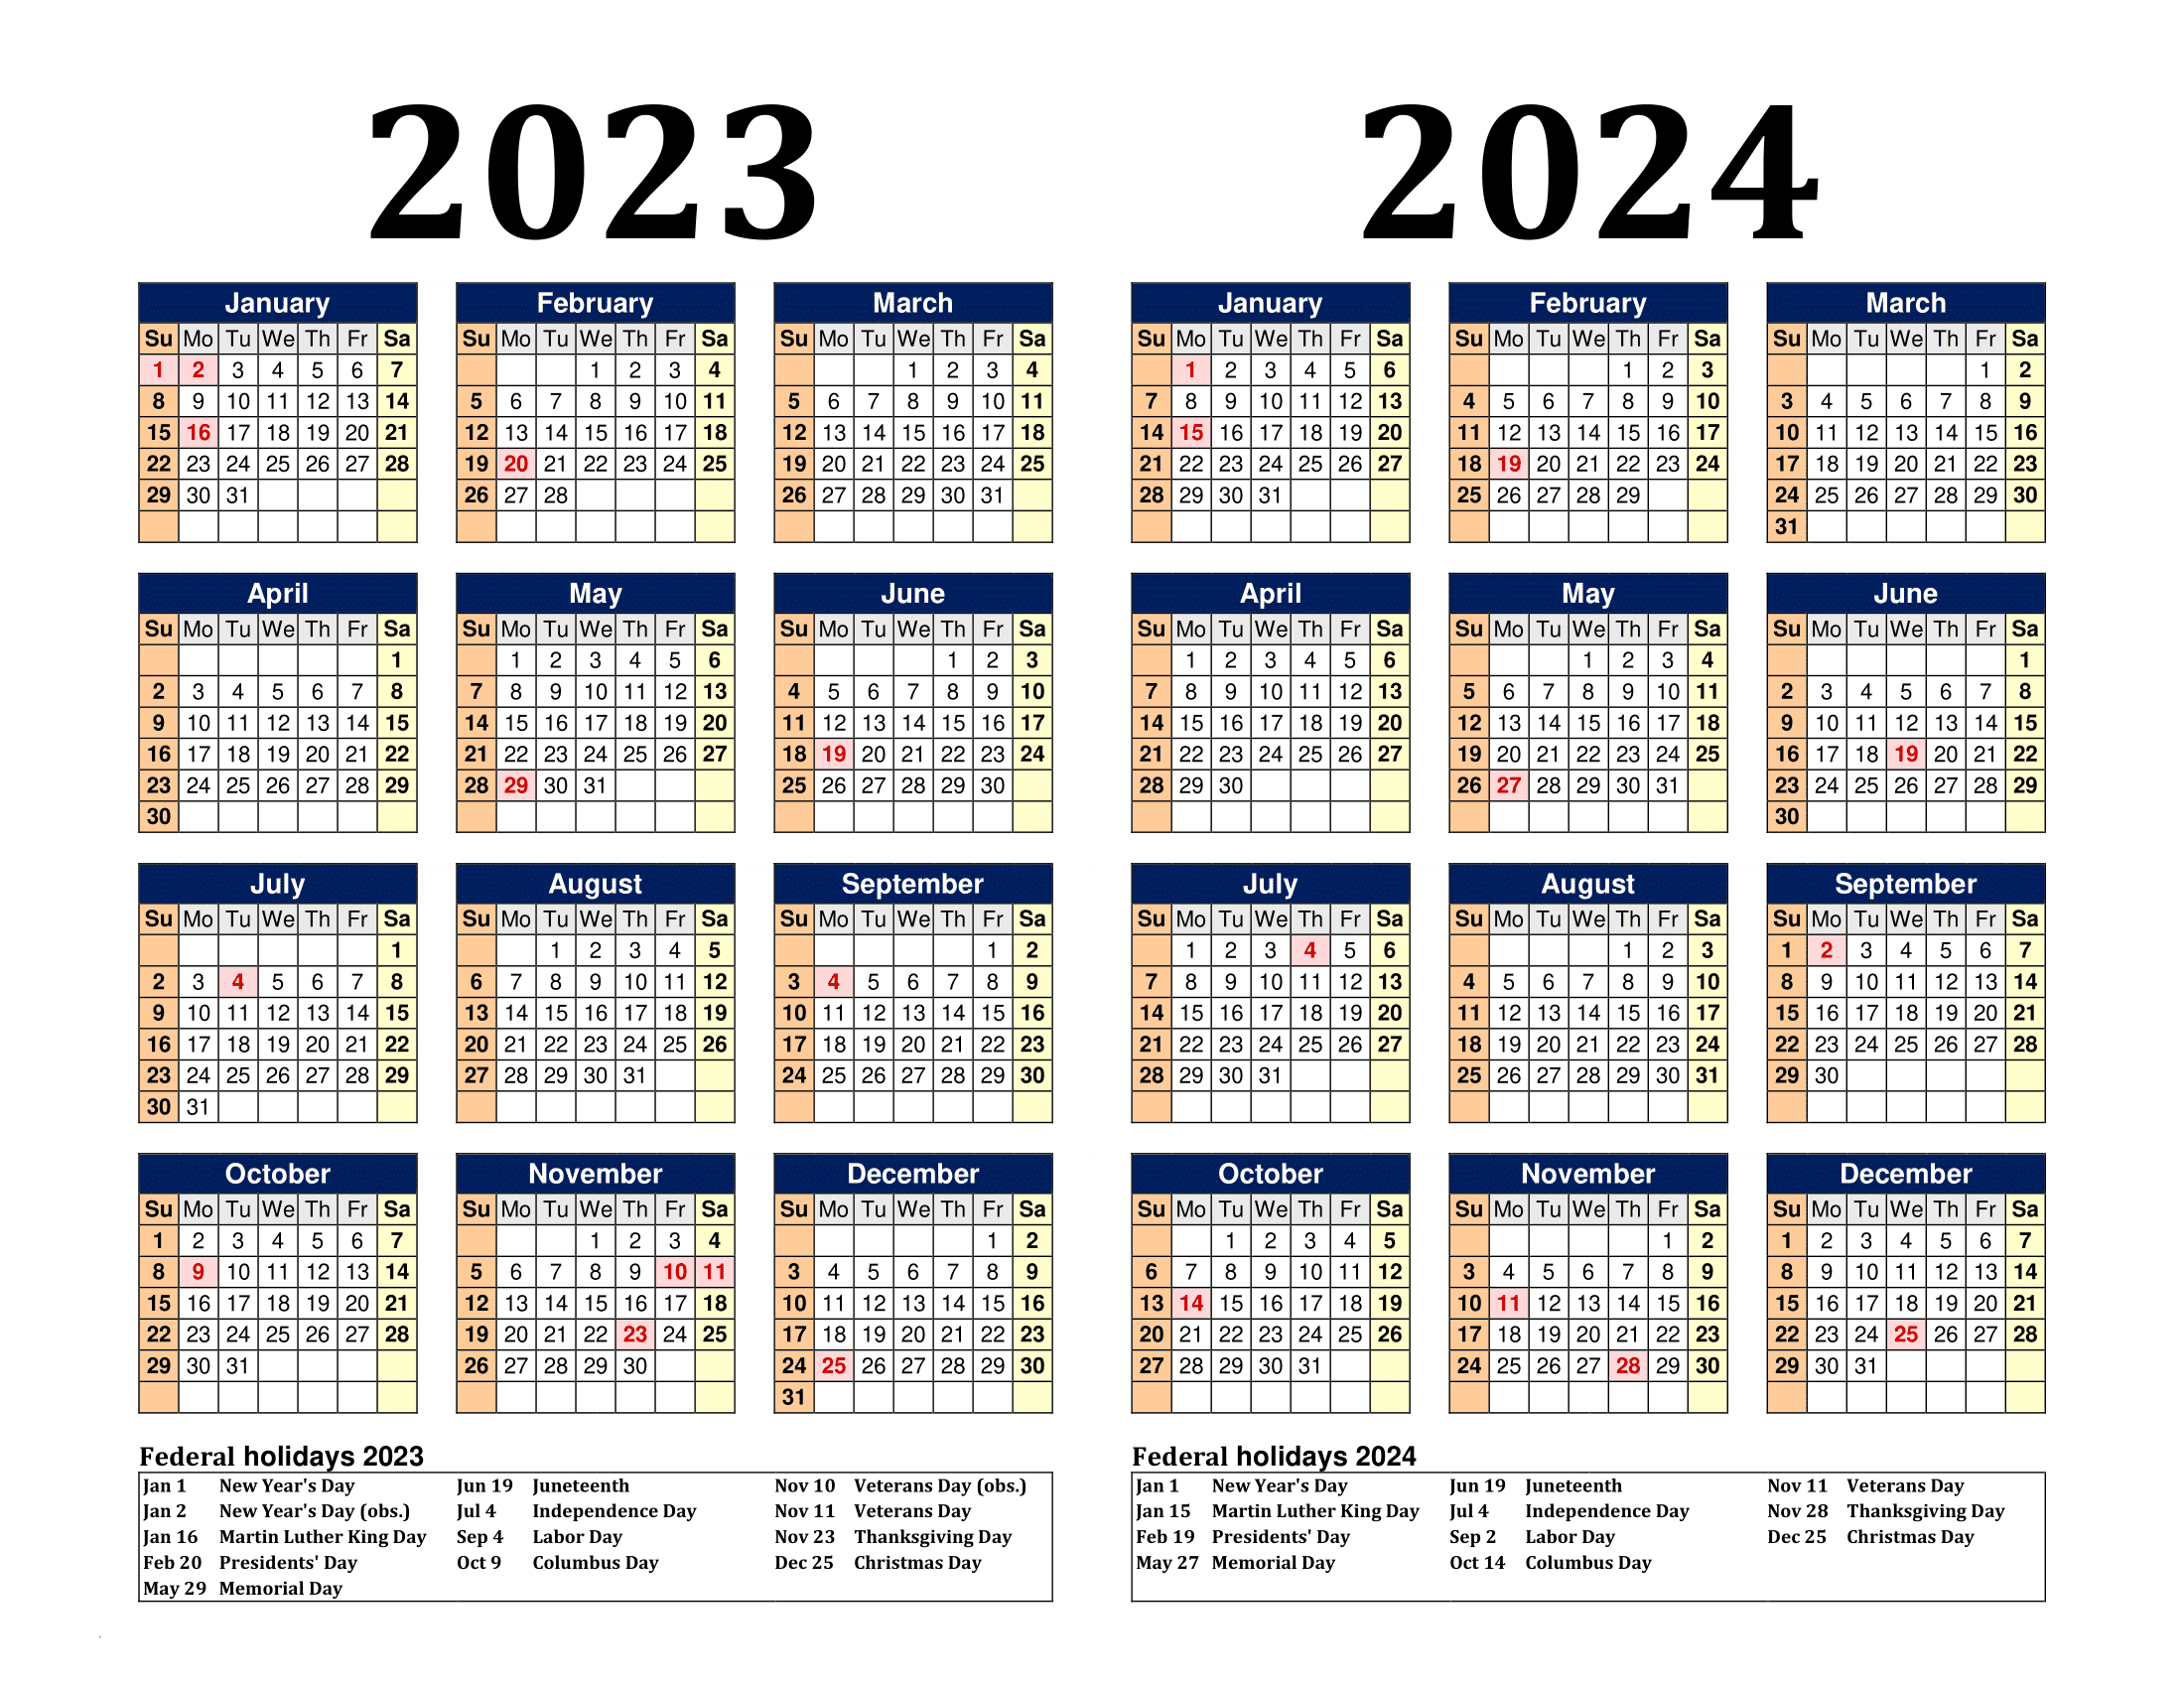 Free Printable Two Year Calendar Templates For 2023 And 2024 In Pdf | Printable Calendar 2023 And 2024 Free